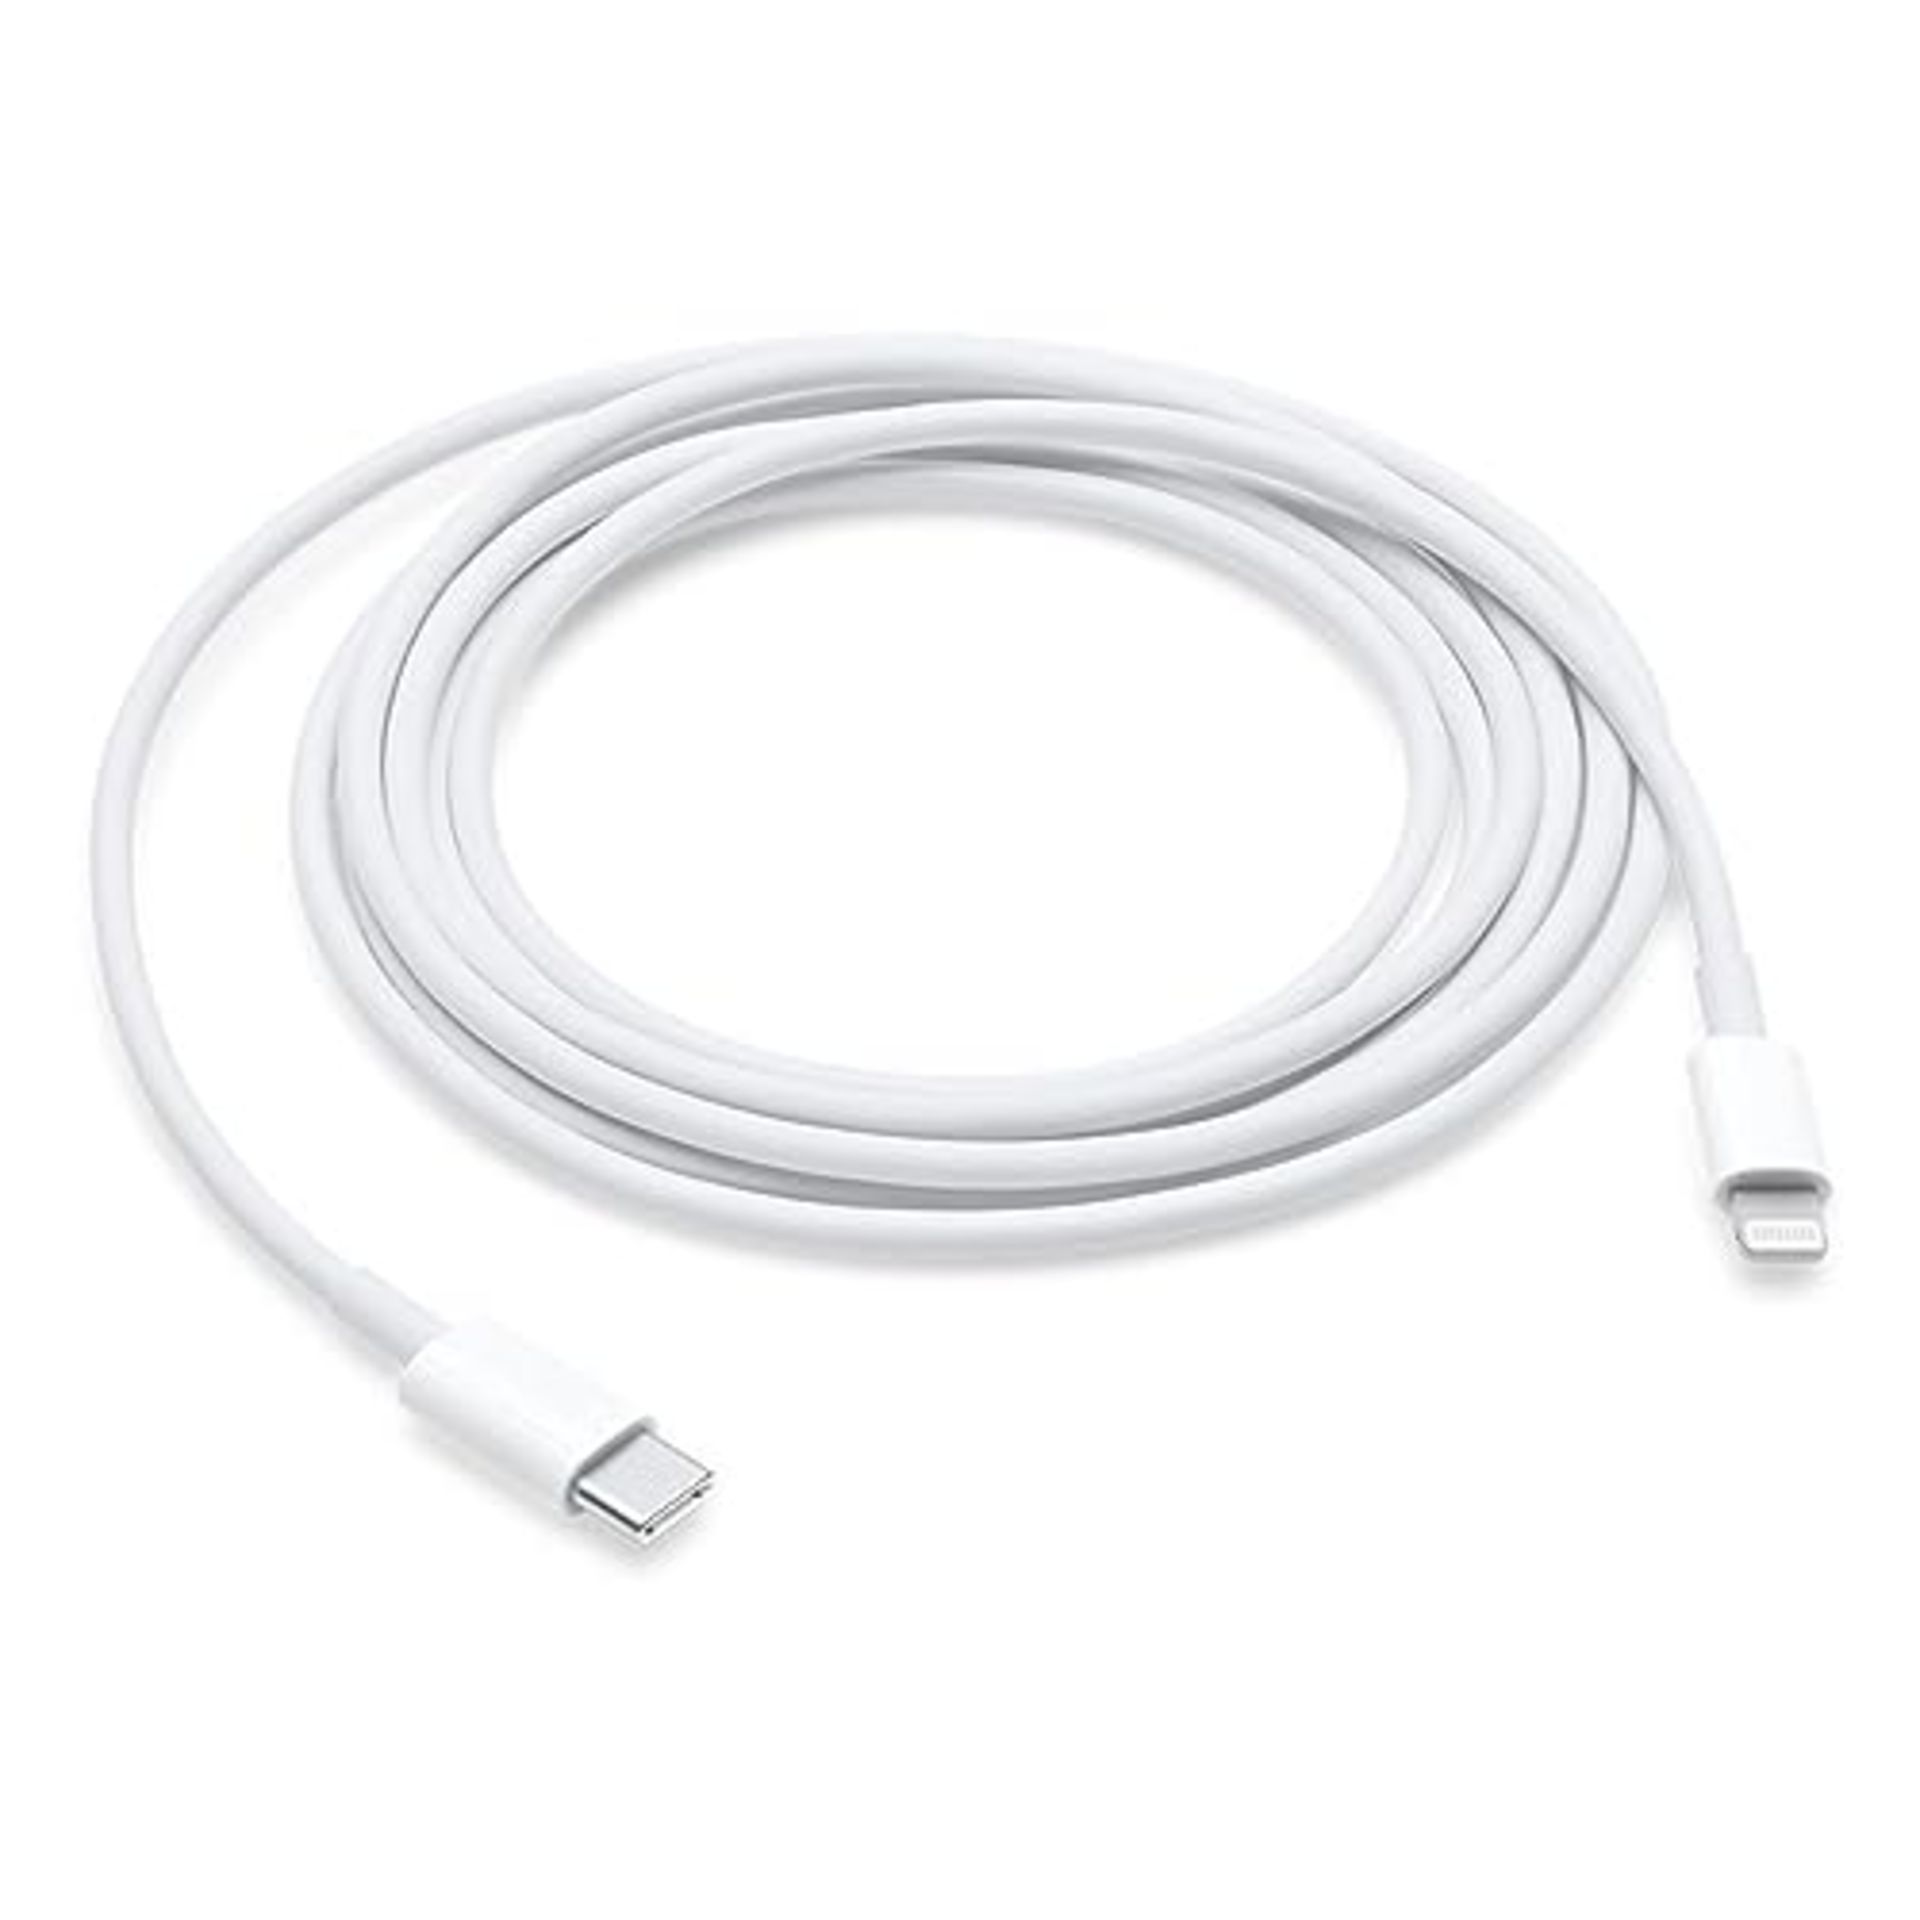 Apple Lightning to USB-C Cable (1m), Tablet - Image 4 of 6